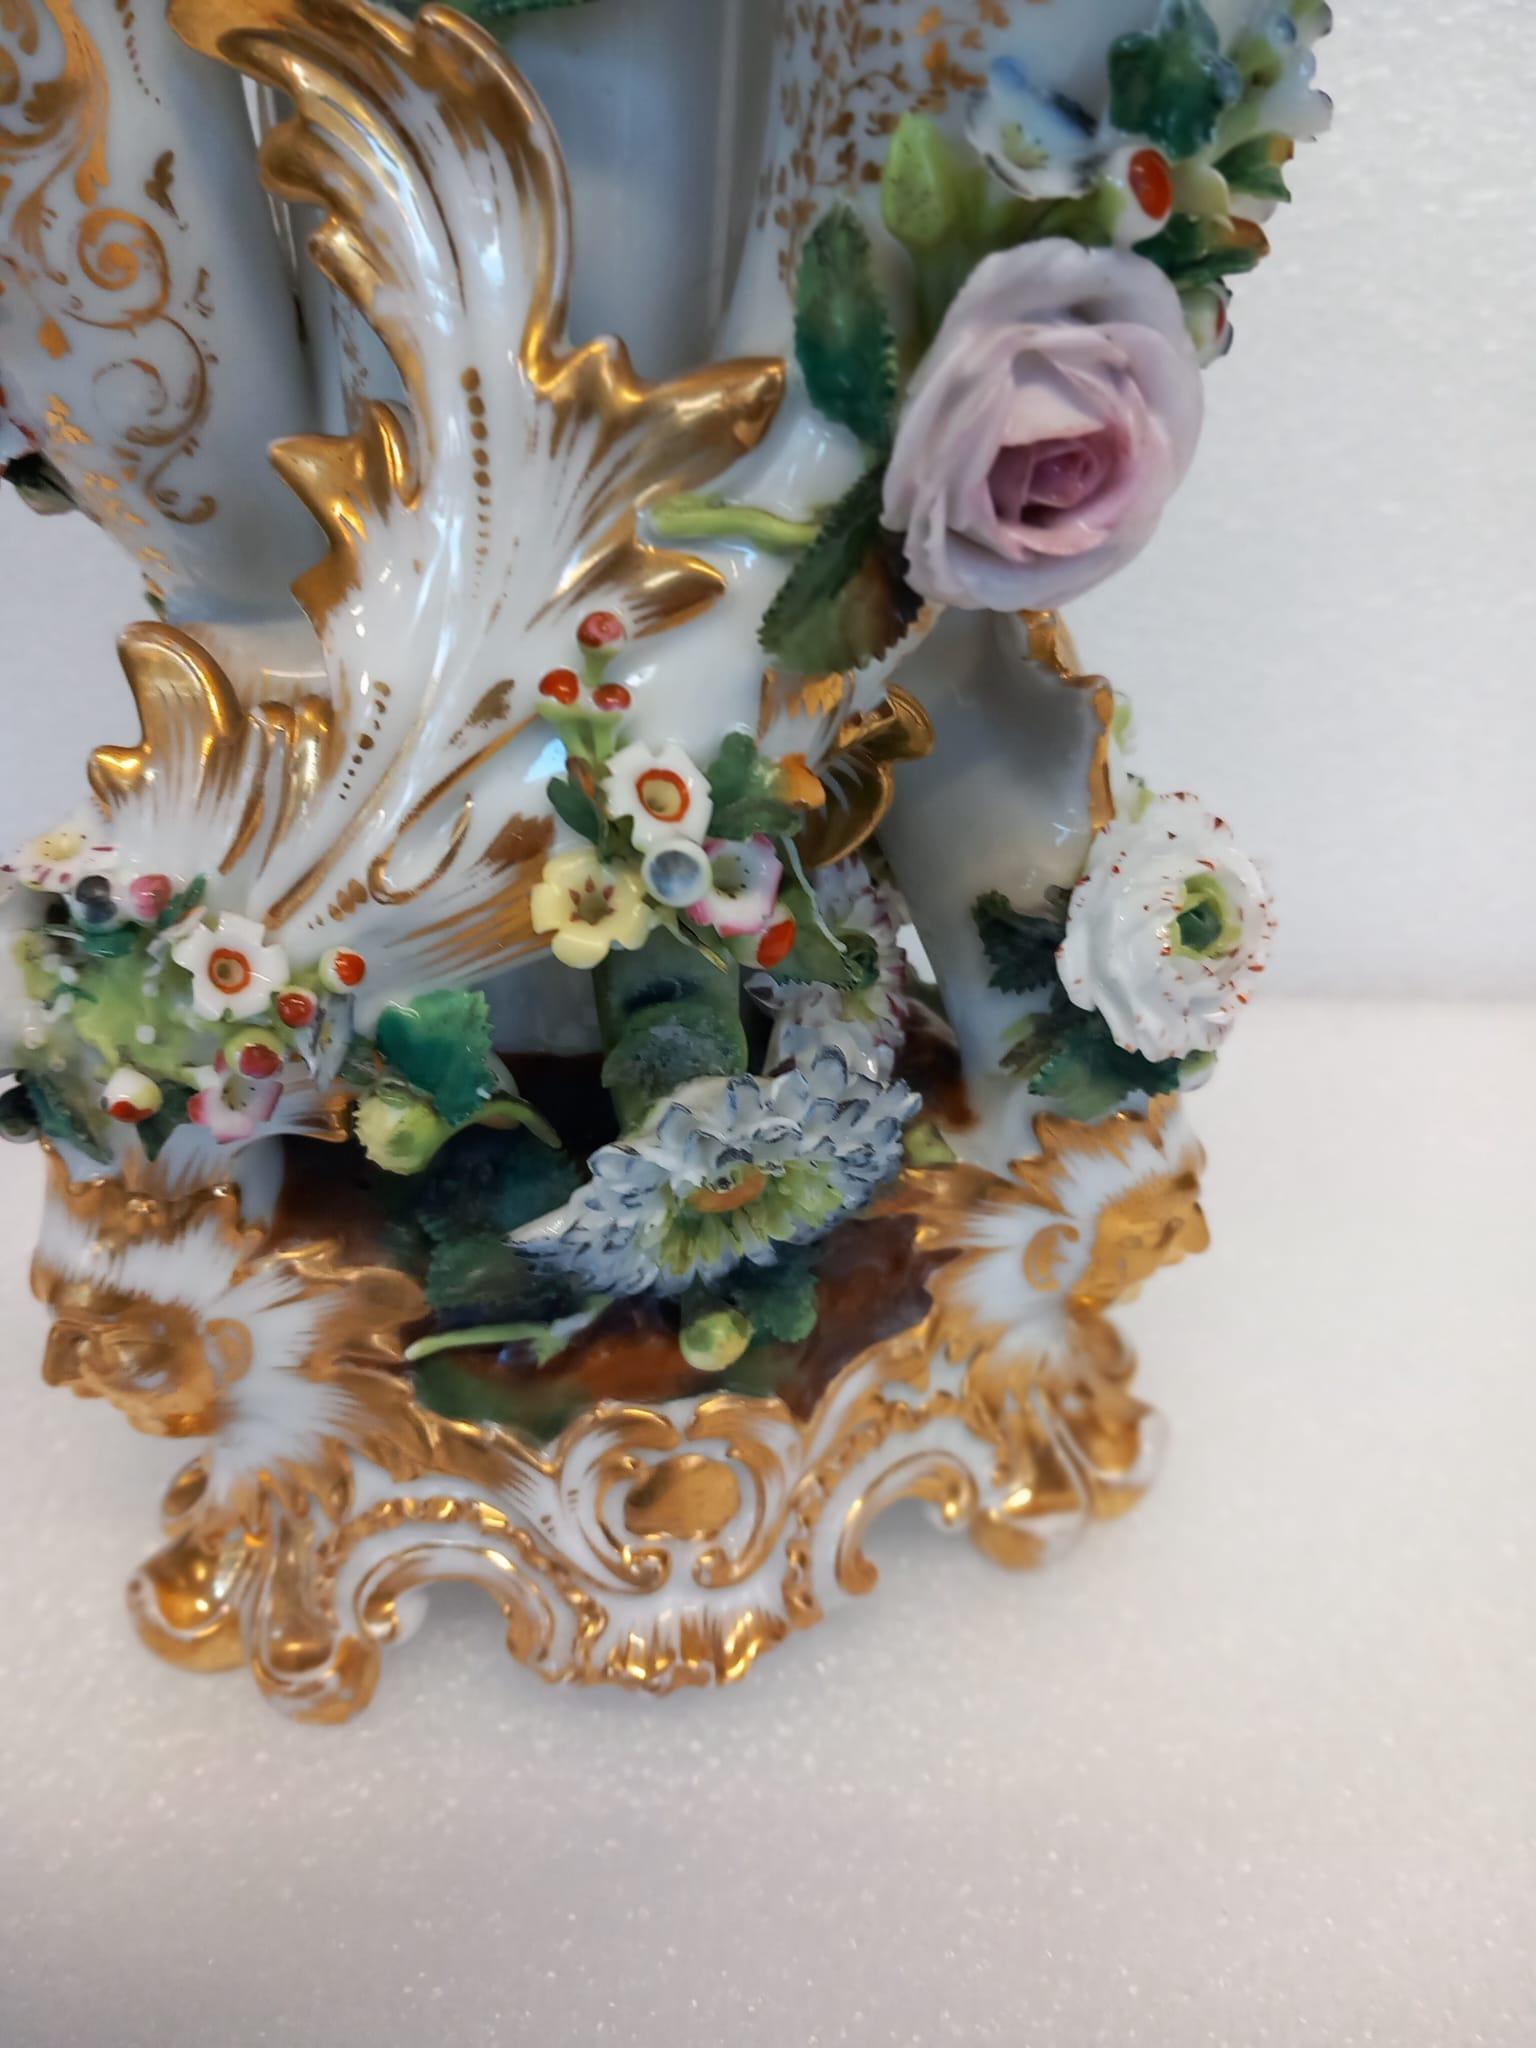 An unusual antique Paris porcelain vase in the shape of an épergne with a large central flower holder and two smaller ones on either side. 
Heavily encrusted with porcelain moulded flowers and decorated with gold leaf designs, moulded in white